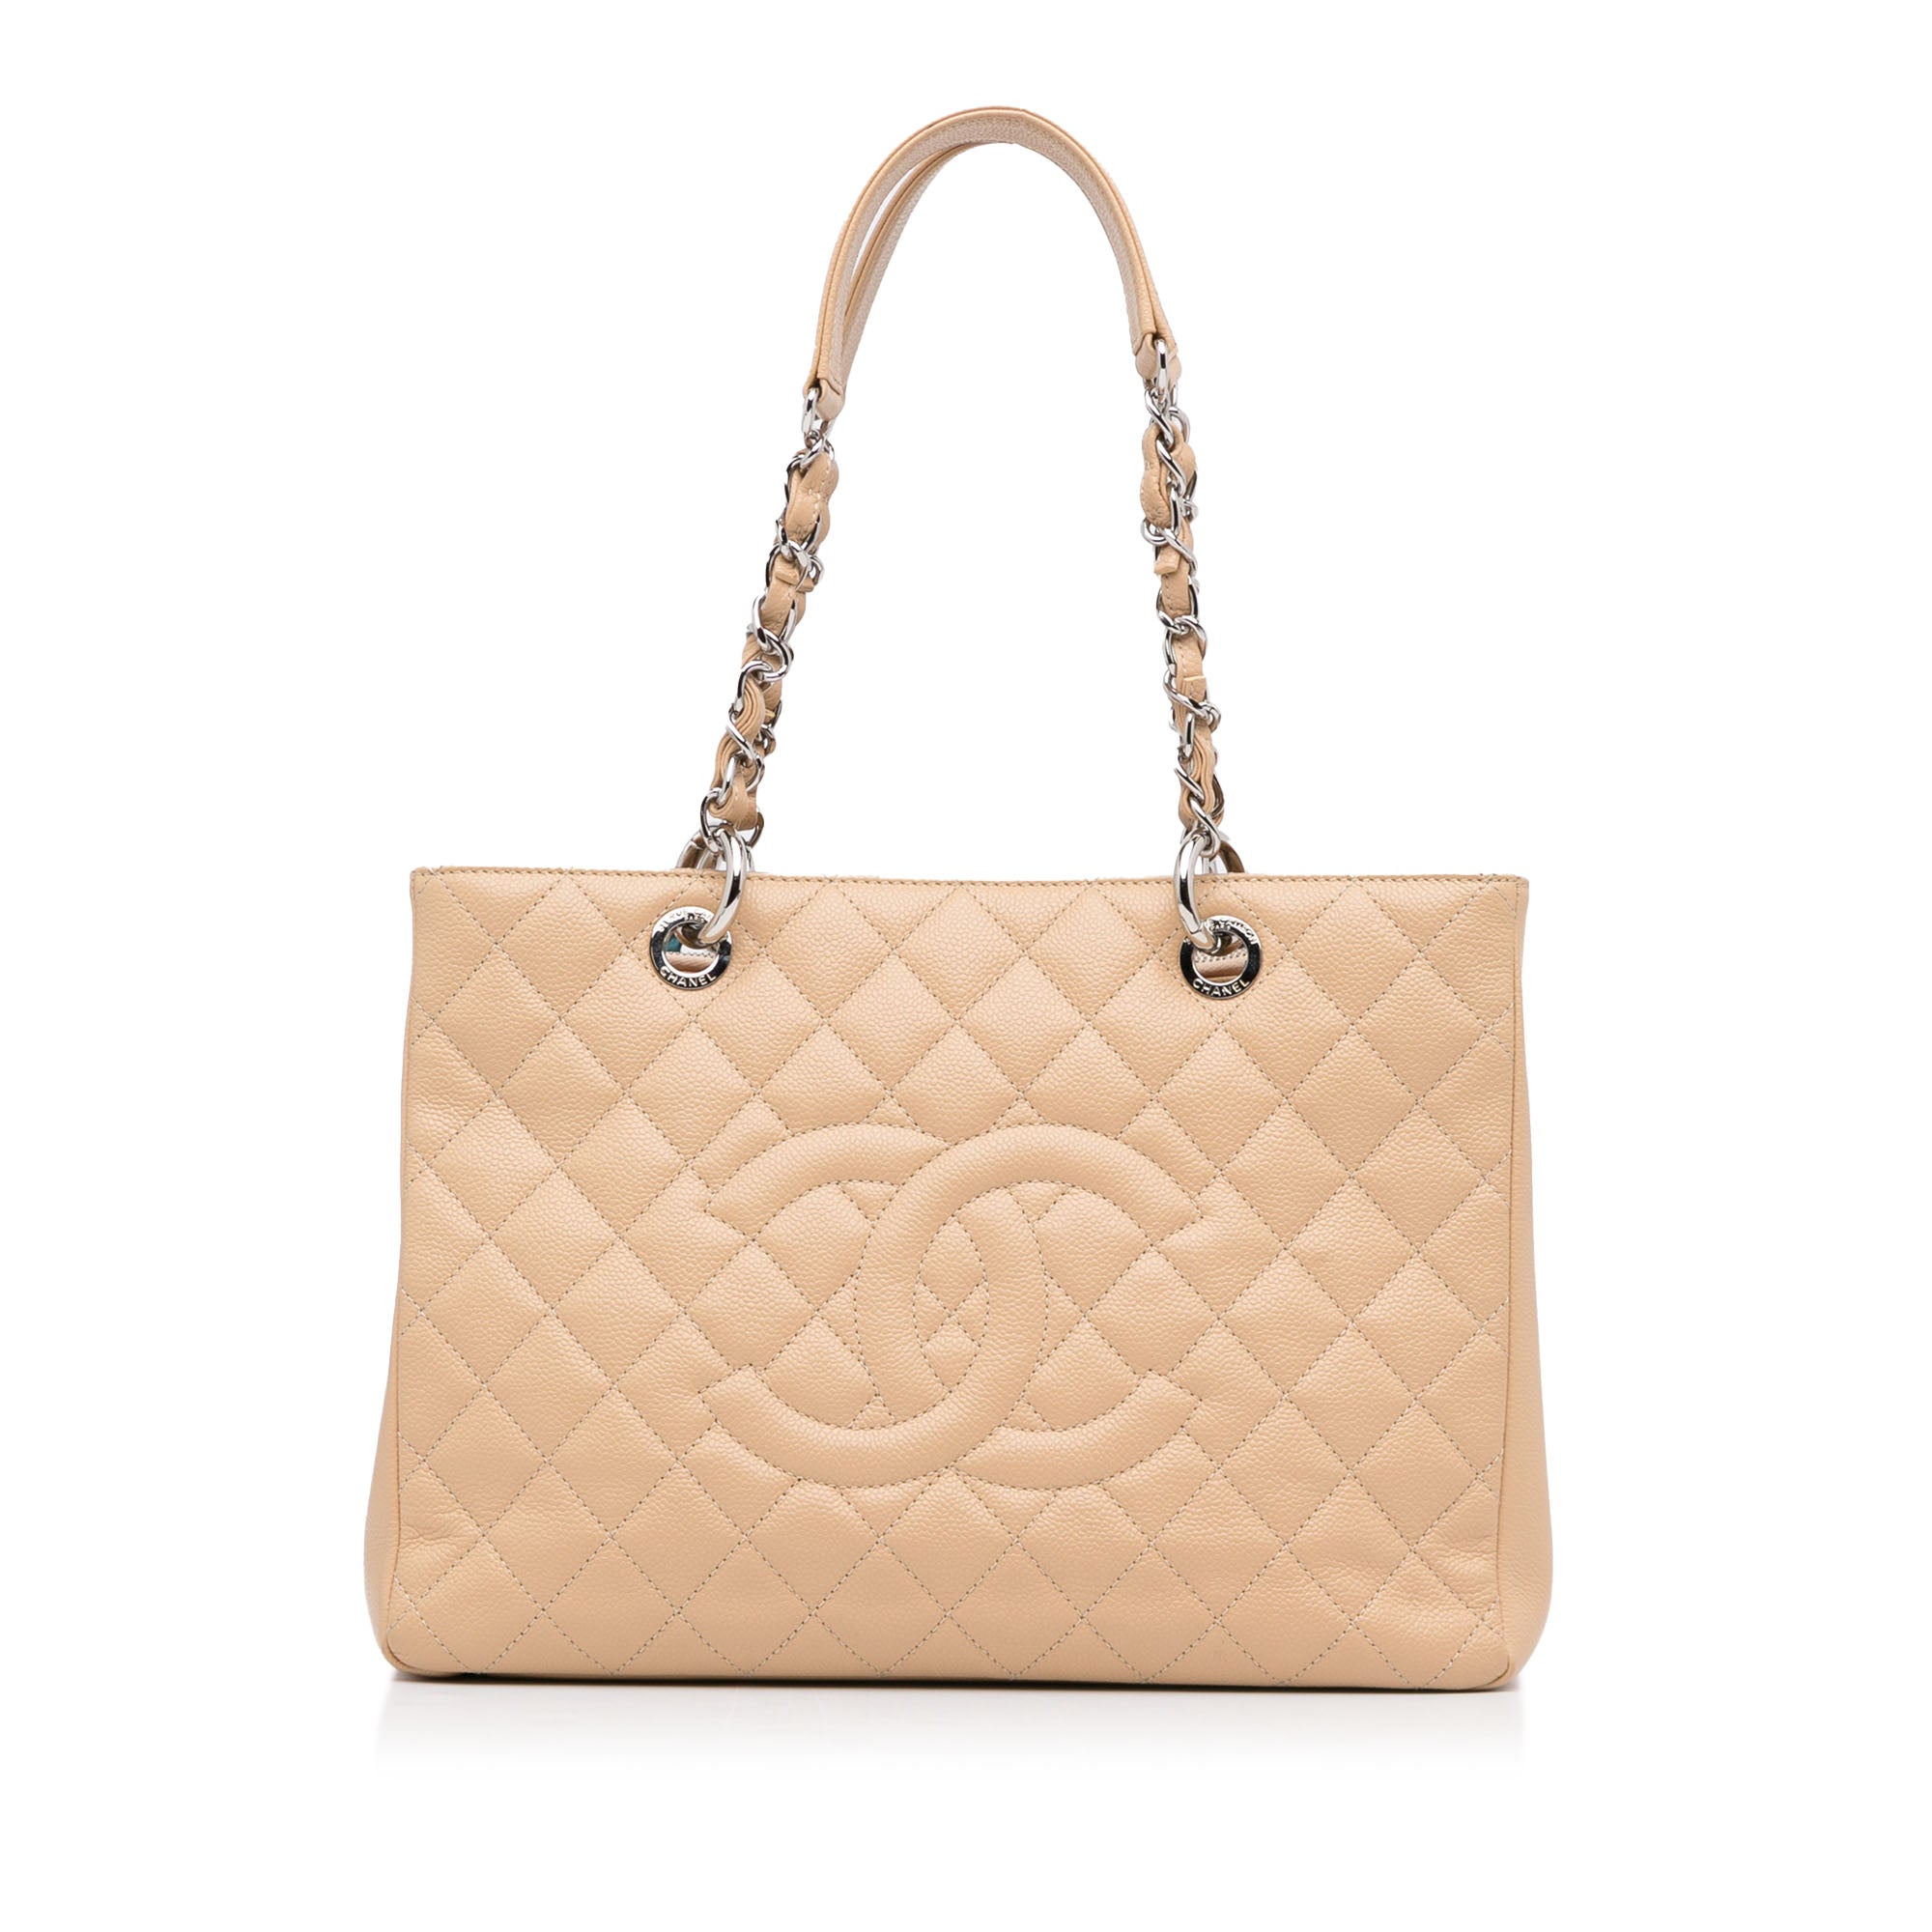 Chanel Grand Shopping Tote GST in Beige Caviar with Gold Hardware - SOLD